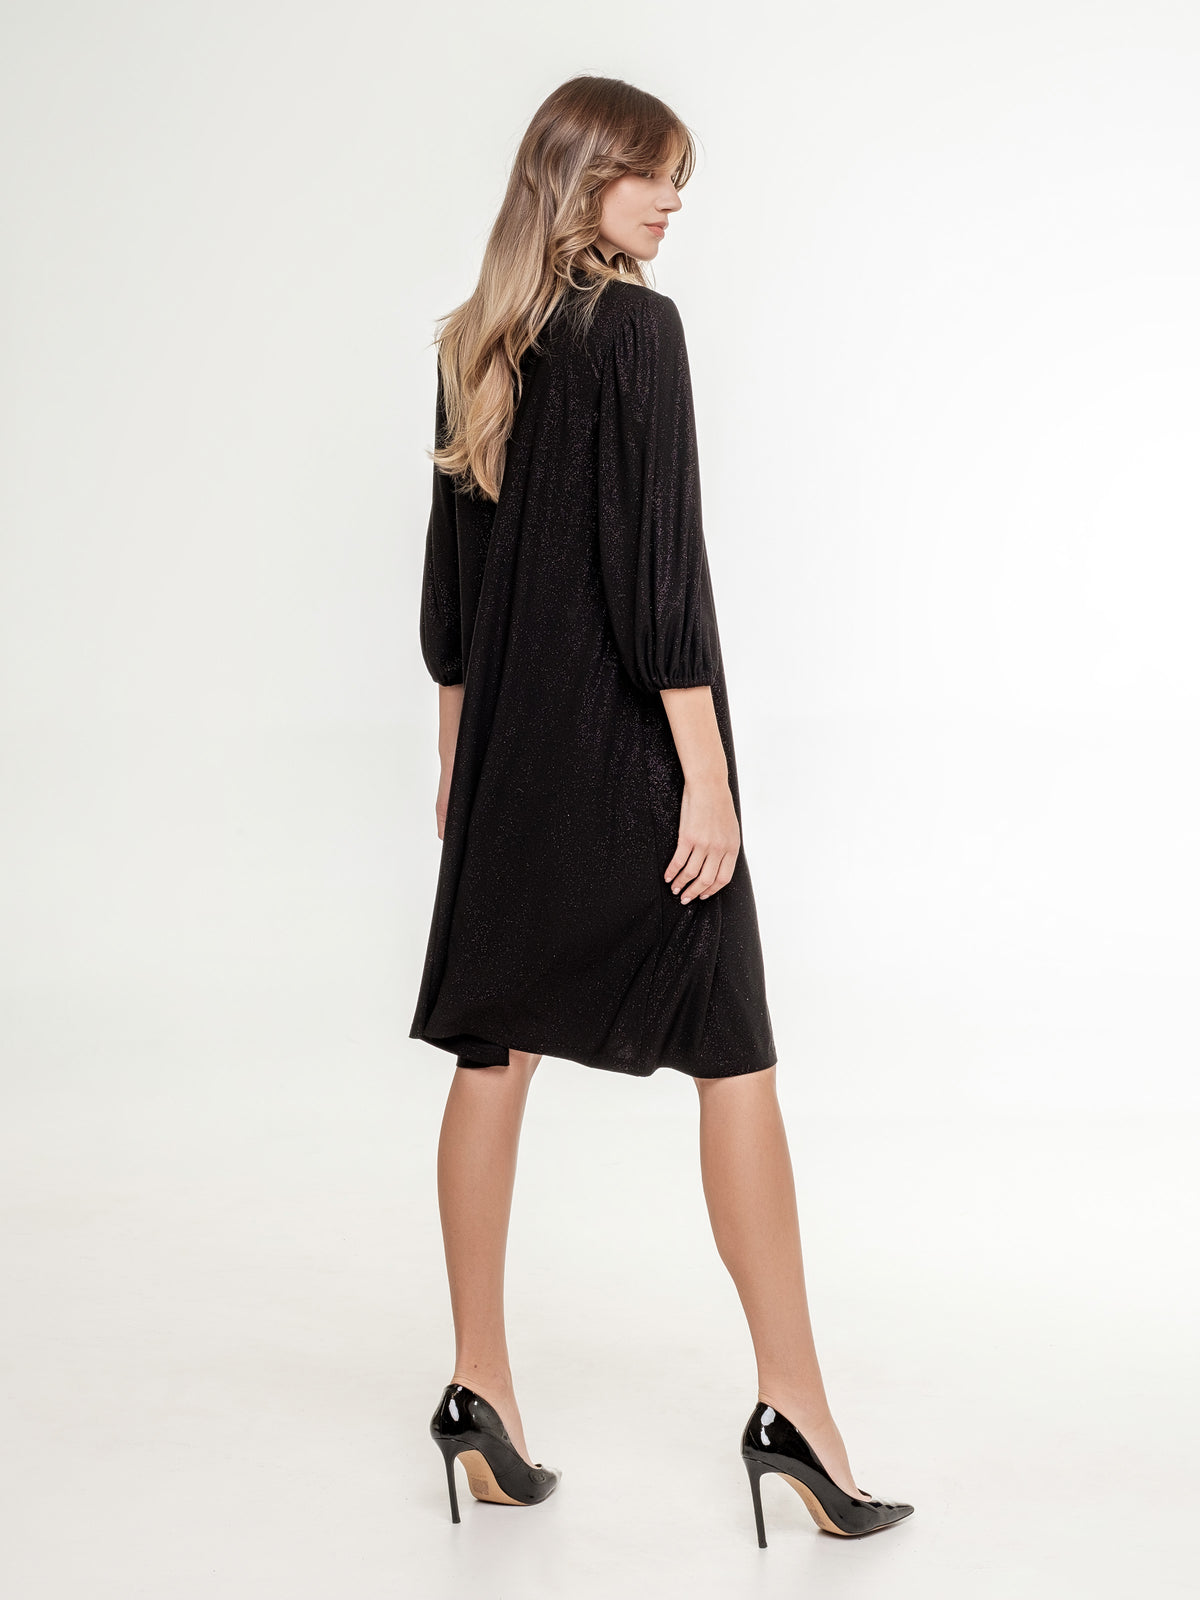 short_glossy_black_dress_with_high_neck_line 3/4 sleeves side view